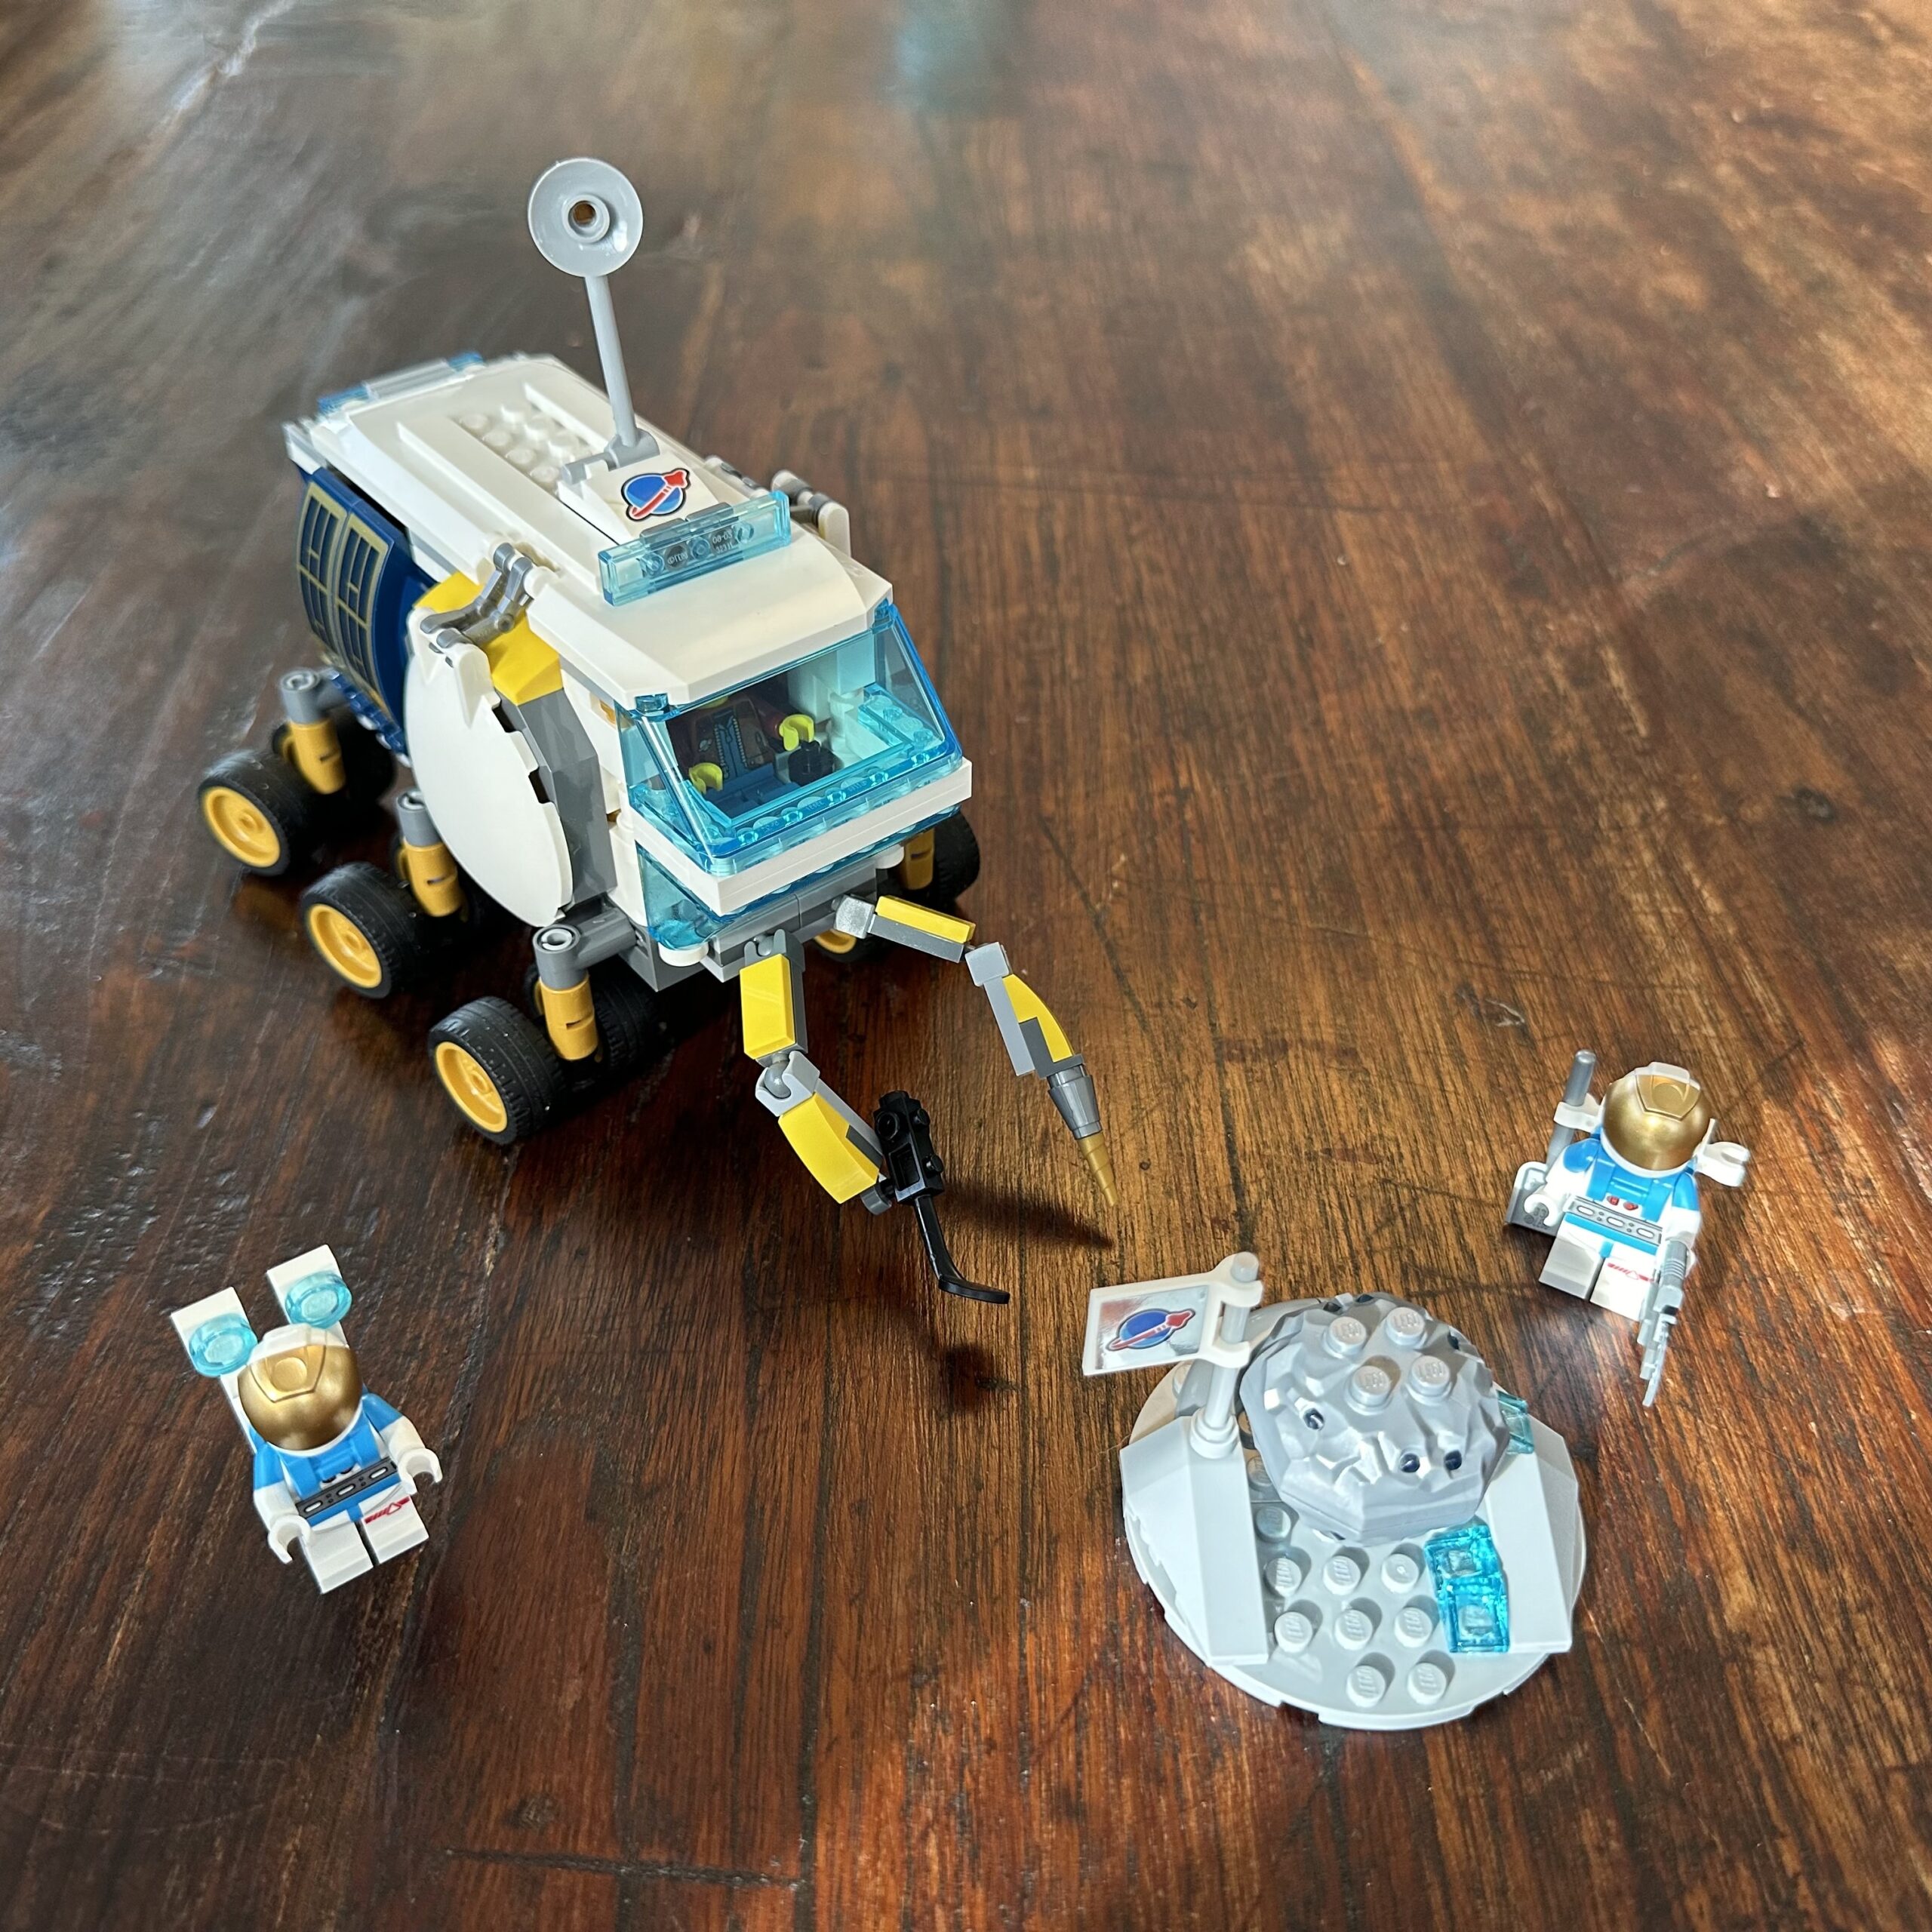 LEGO rover with two astronauts and a geode